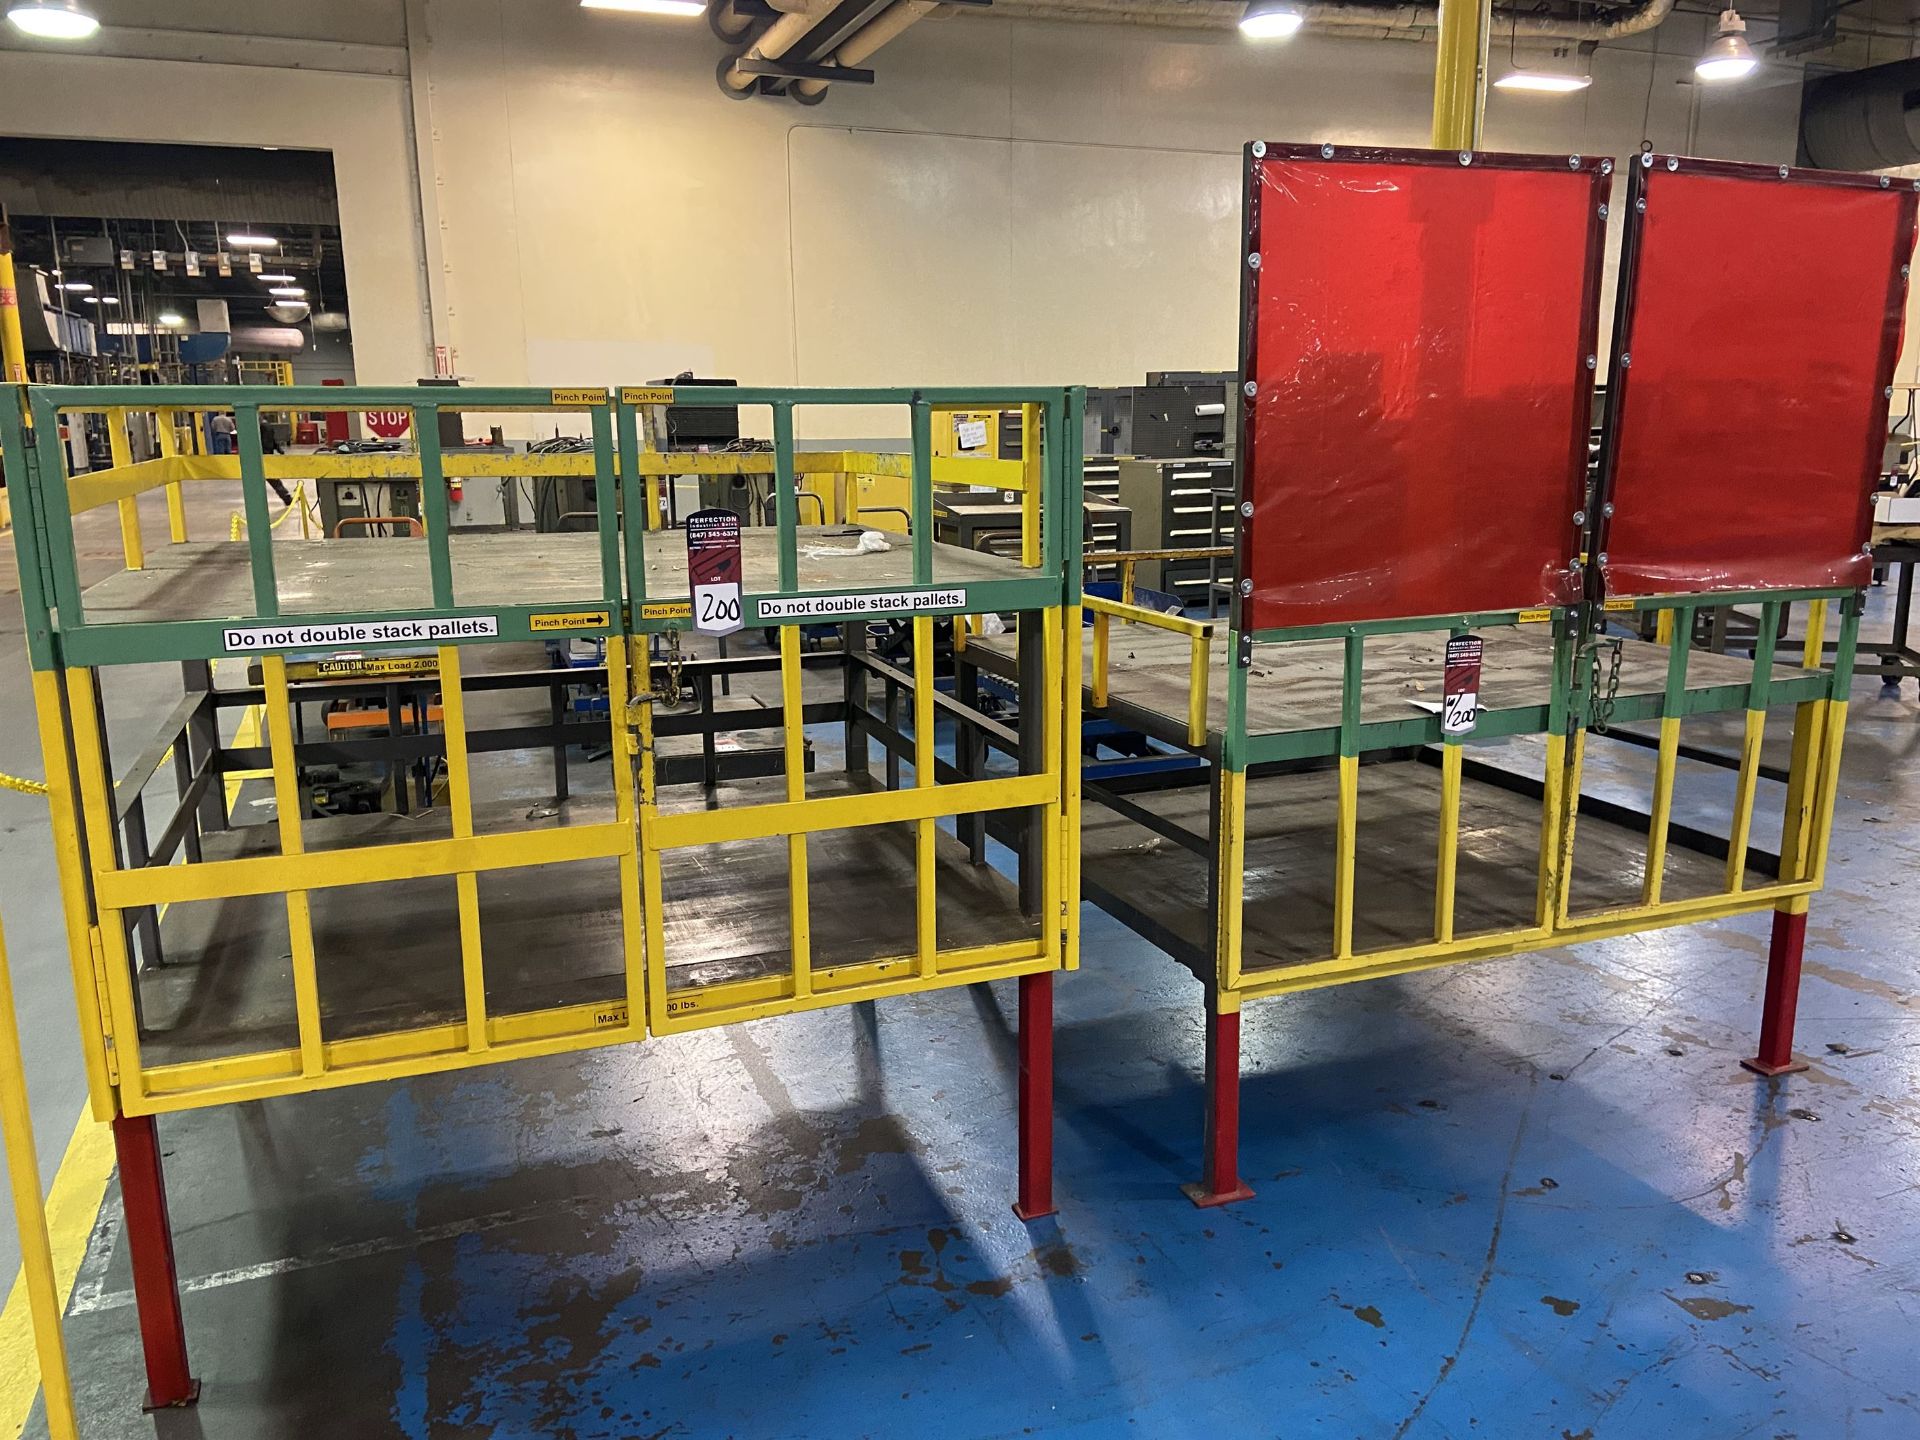 Lot of (2) Pallet Stands, 2 Tiered 58" x 50" (Attention: Will be sold LOADED. Please schedule